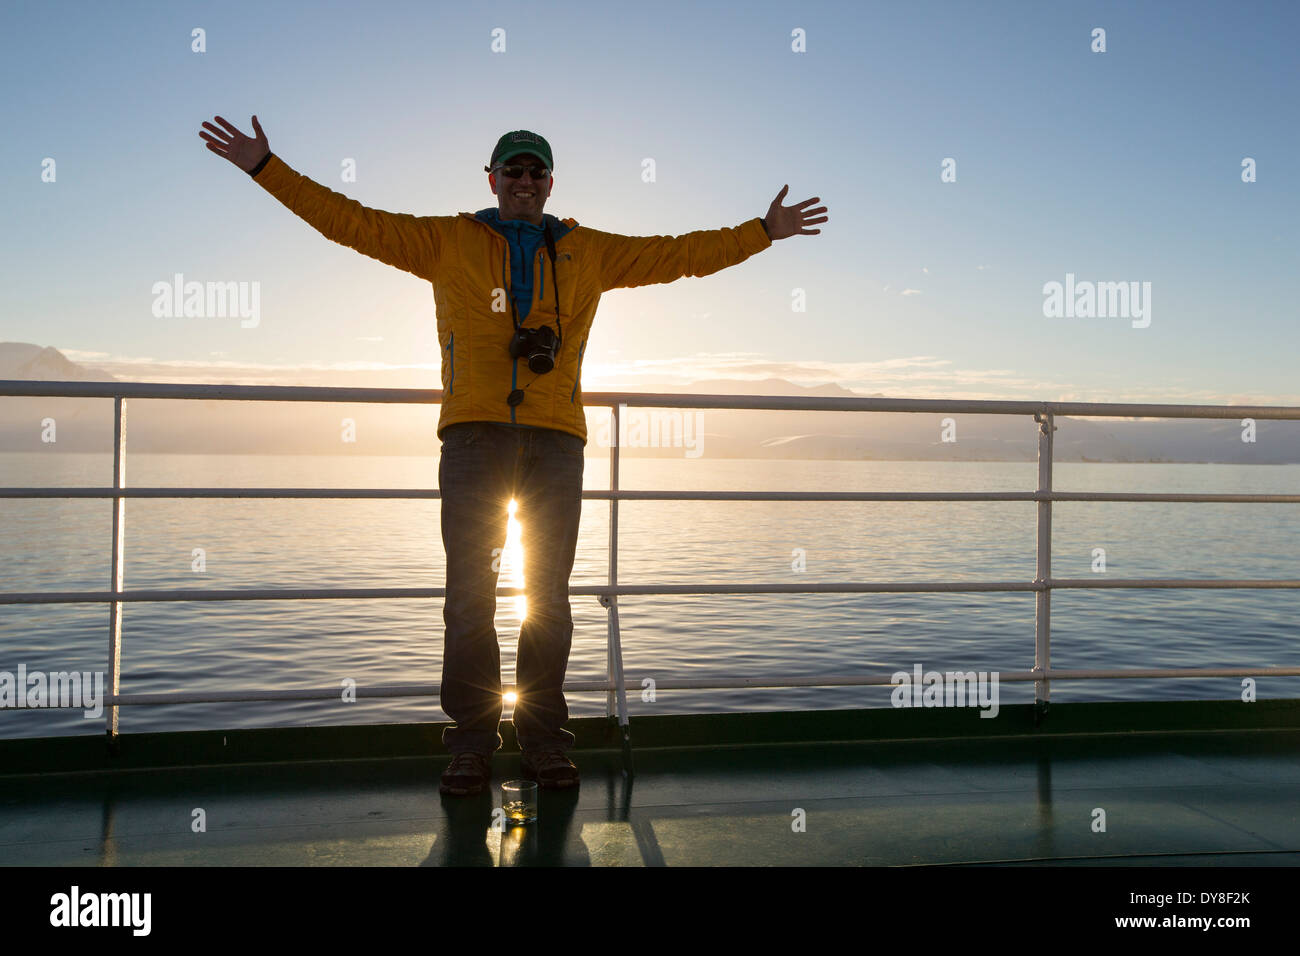 A passenger on the deck of the Akademik Sergey Vavilov, an ice strengthened ship on an expedition cruise to Antarctica Stock Photo